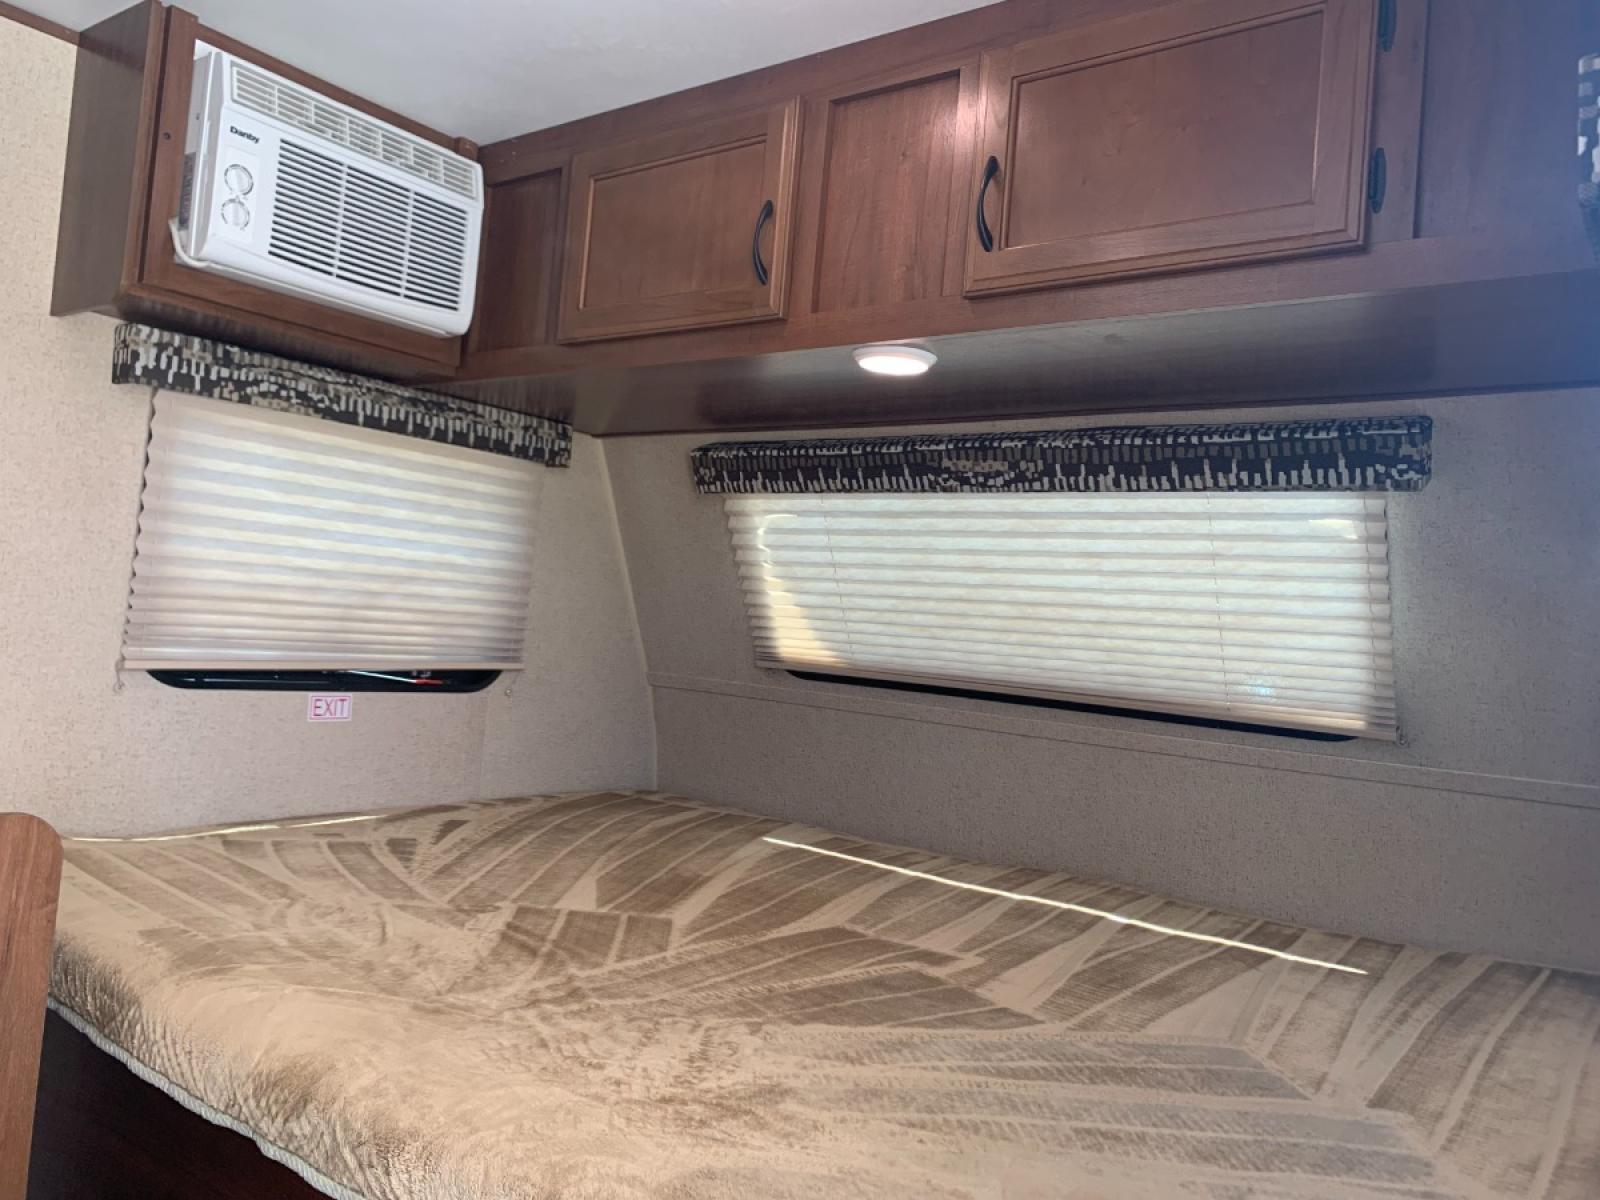 2016 TAN JAYCO Unknown 174BH (1UJBJ0AJ9G1) , located at 17760 Hwy 62, Morris, OK, 74445, 35.609104, -95.877060 - 2016 JAYCO JAY FLIGHT SLX 174BH IS 21.5FT LONG. THE OUTSIDE FEATURES A 10FT POWER AWNING, OUTSIDE STORAGE, OUTSIDE SPEAKERS, SINGLE AXLE, REAR MANUAL LEVELING JACKS, AND SPARE TIRE. AS YOU ENTER THE CAMPER, YOU WILL NOTICE THAT THERE ARE 5 WINDOWS SO YOU CAN LET NATURAL SUNLIGHT IN, THE QUEEN BE - Photo #10